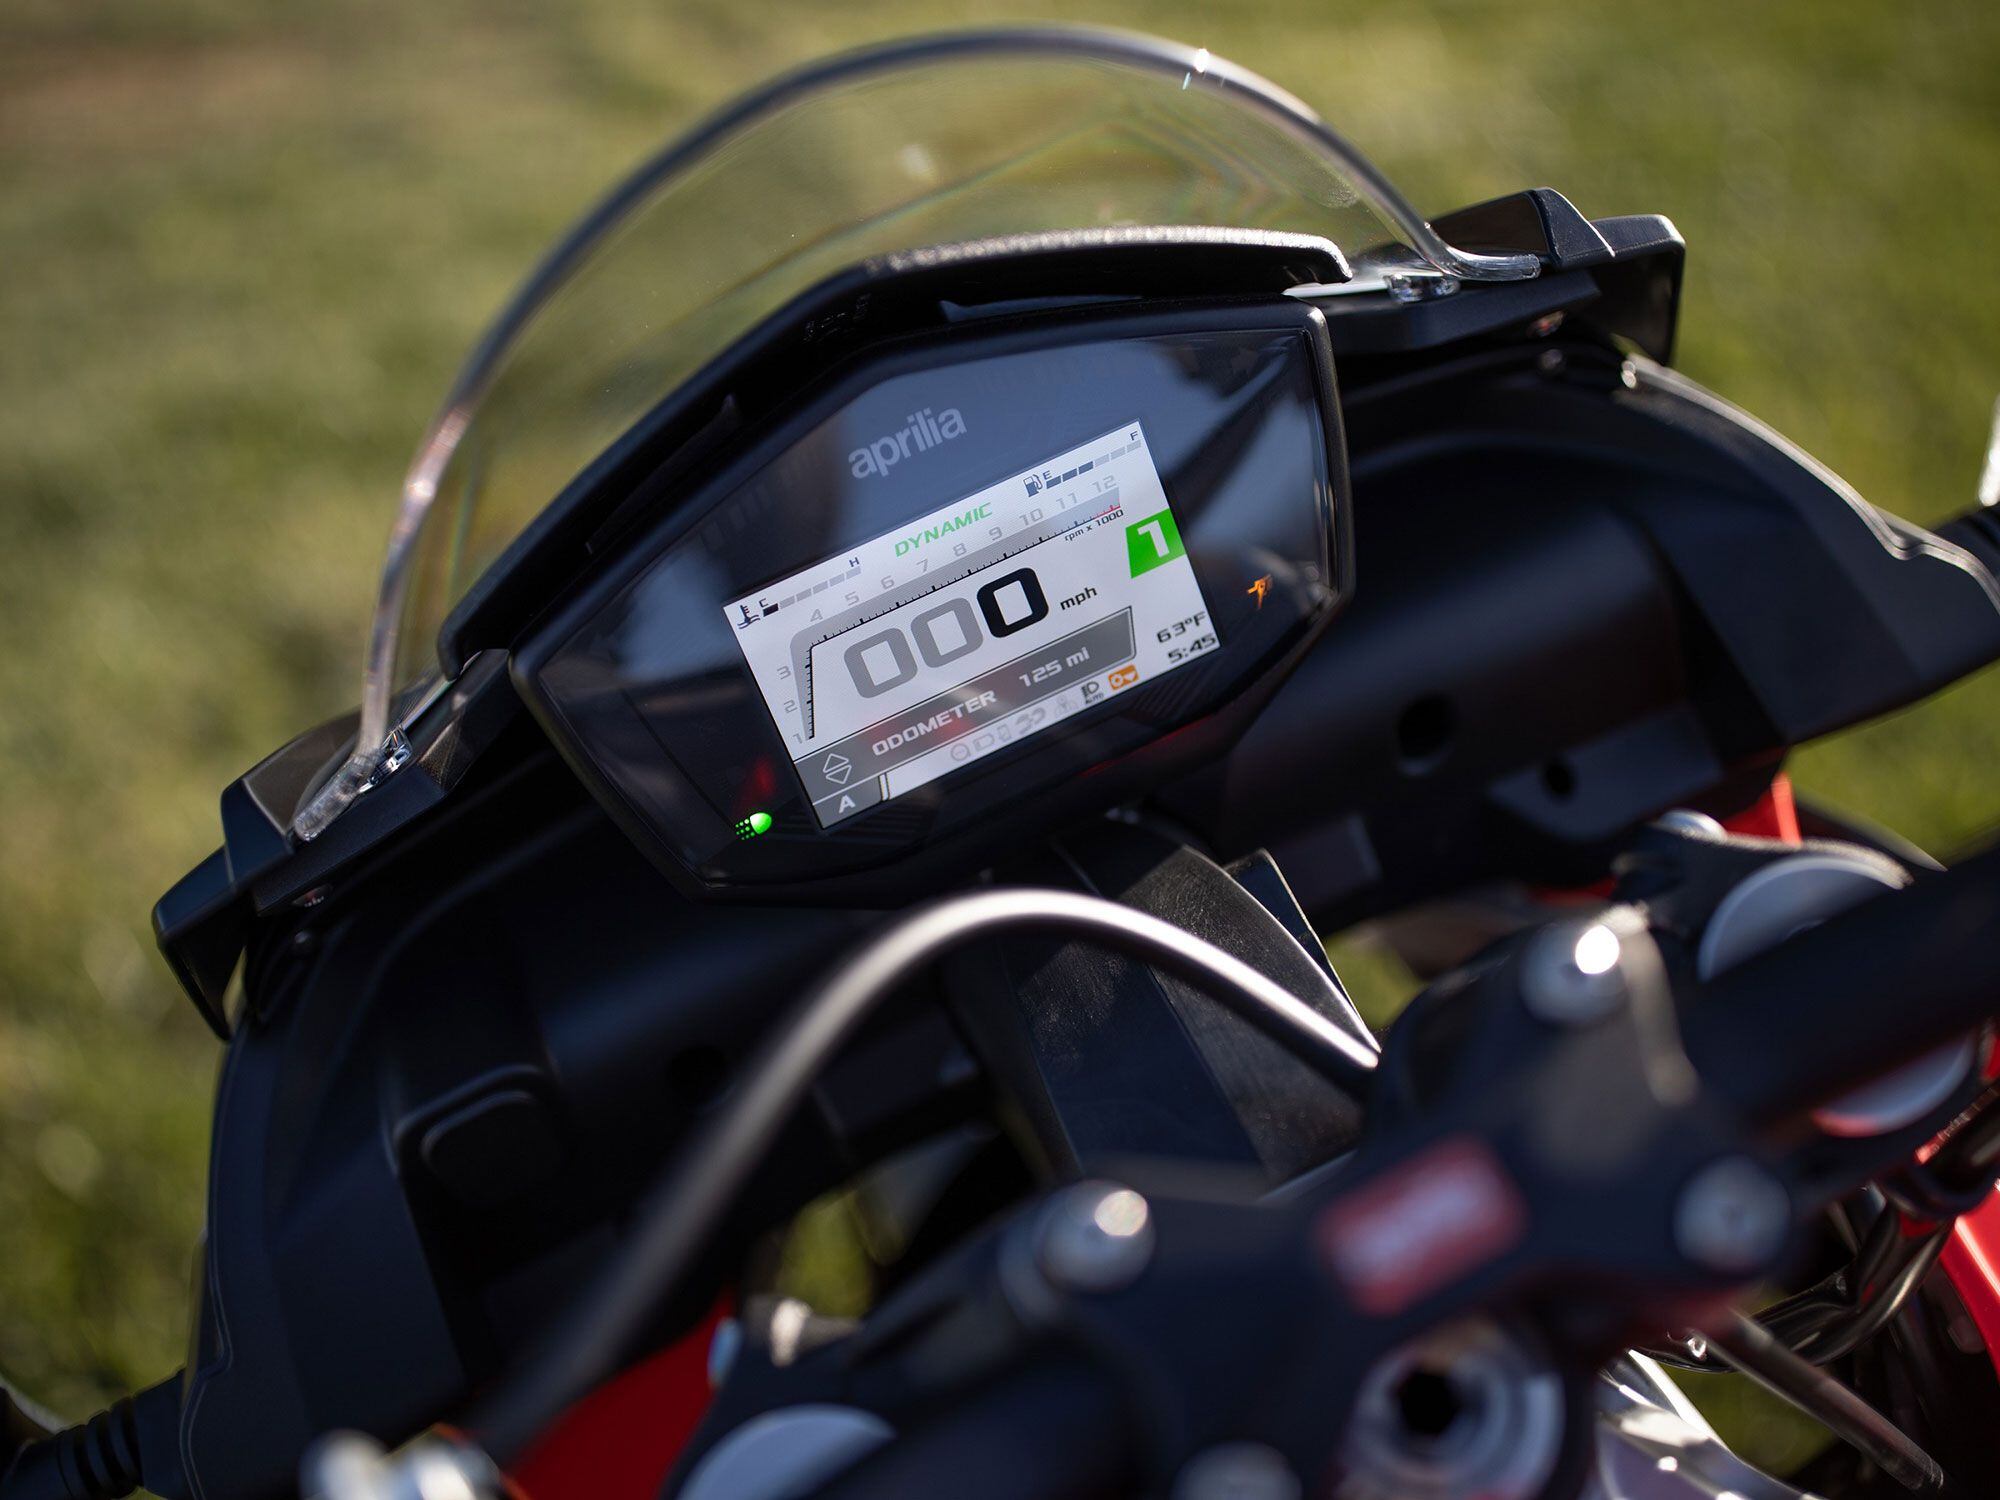 Trickle-down tech from Aprilia’s bigger models includes the premium TFT dash, which allows you to access a full suite of electronic rider aids.